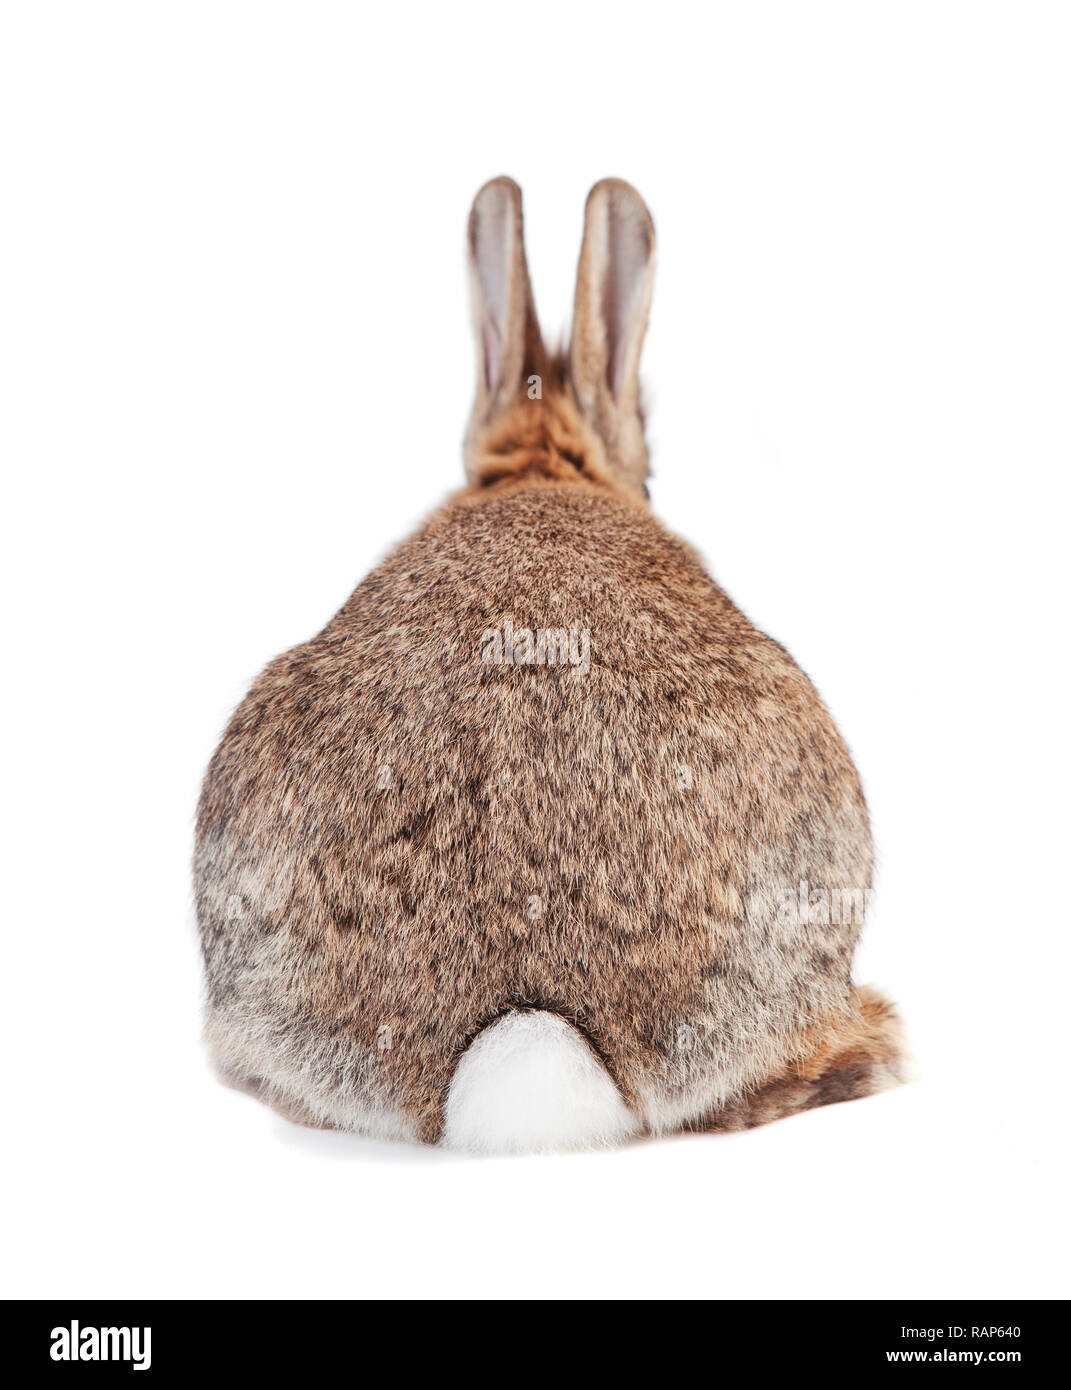 a rabbit with brown gray fur and long ears isolated against a white background Stock Photo